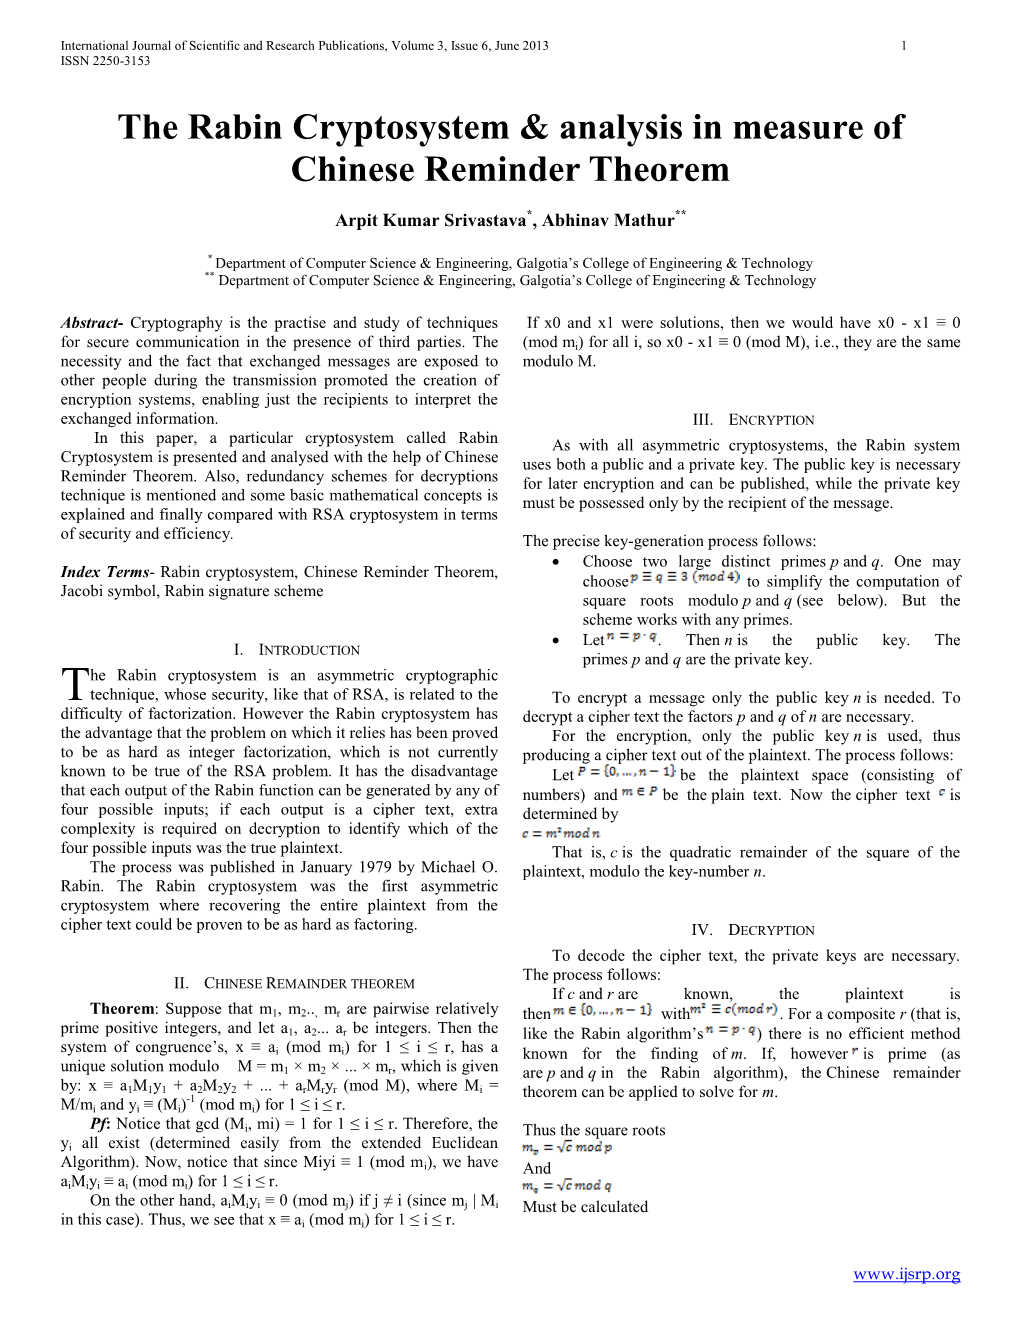 The Rabin Cryptosystem & Analysis in Measure of Chinese Reminder Theorem